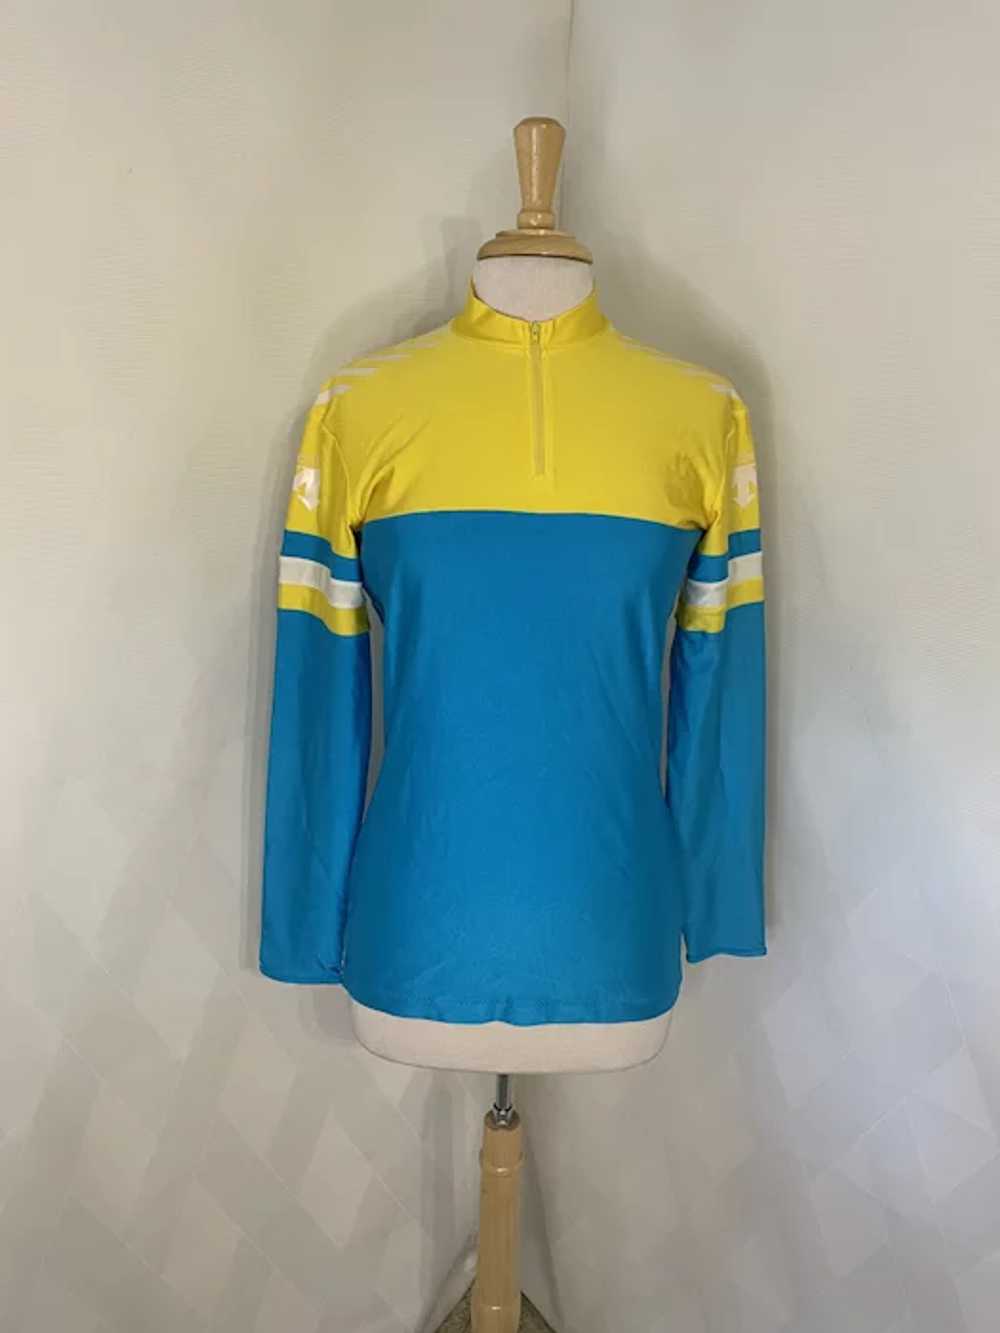 Vintage 1990s Descente Yellow and Blue Long Sleev… - image 2